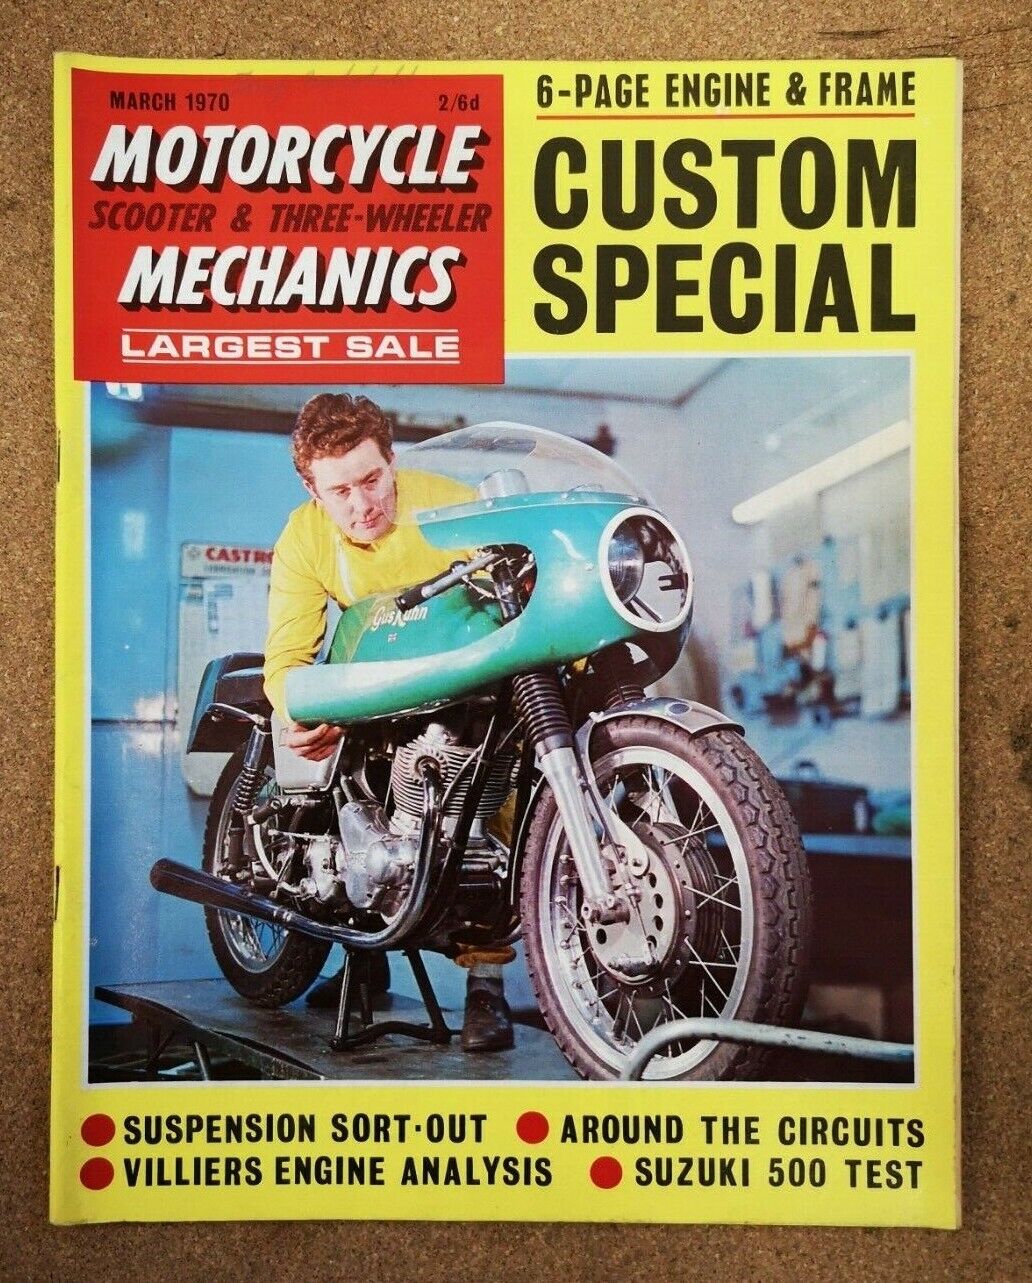 Magazine - Motorcycle Scooter 3 Wheeler Mechanic Contents Index Shown - Various 